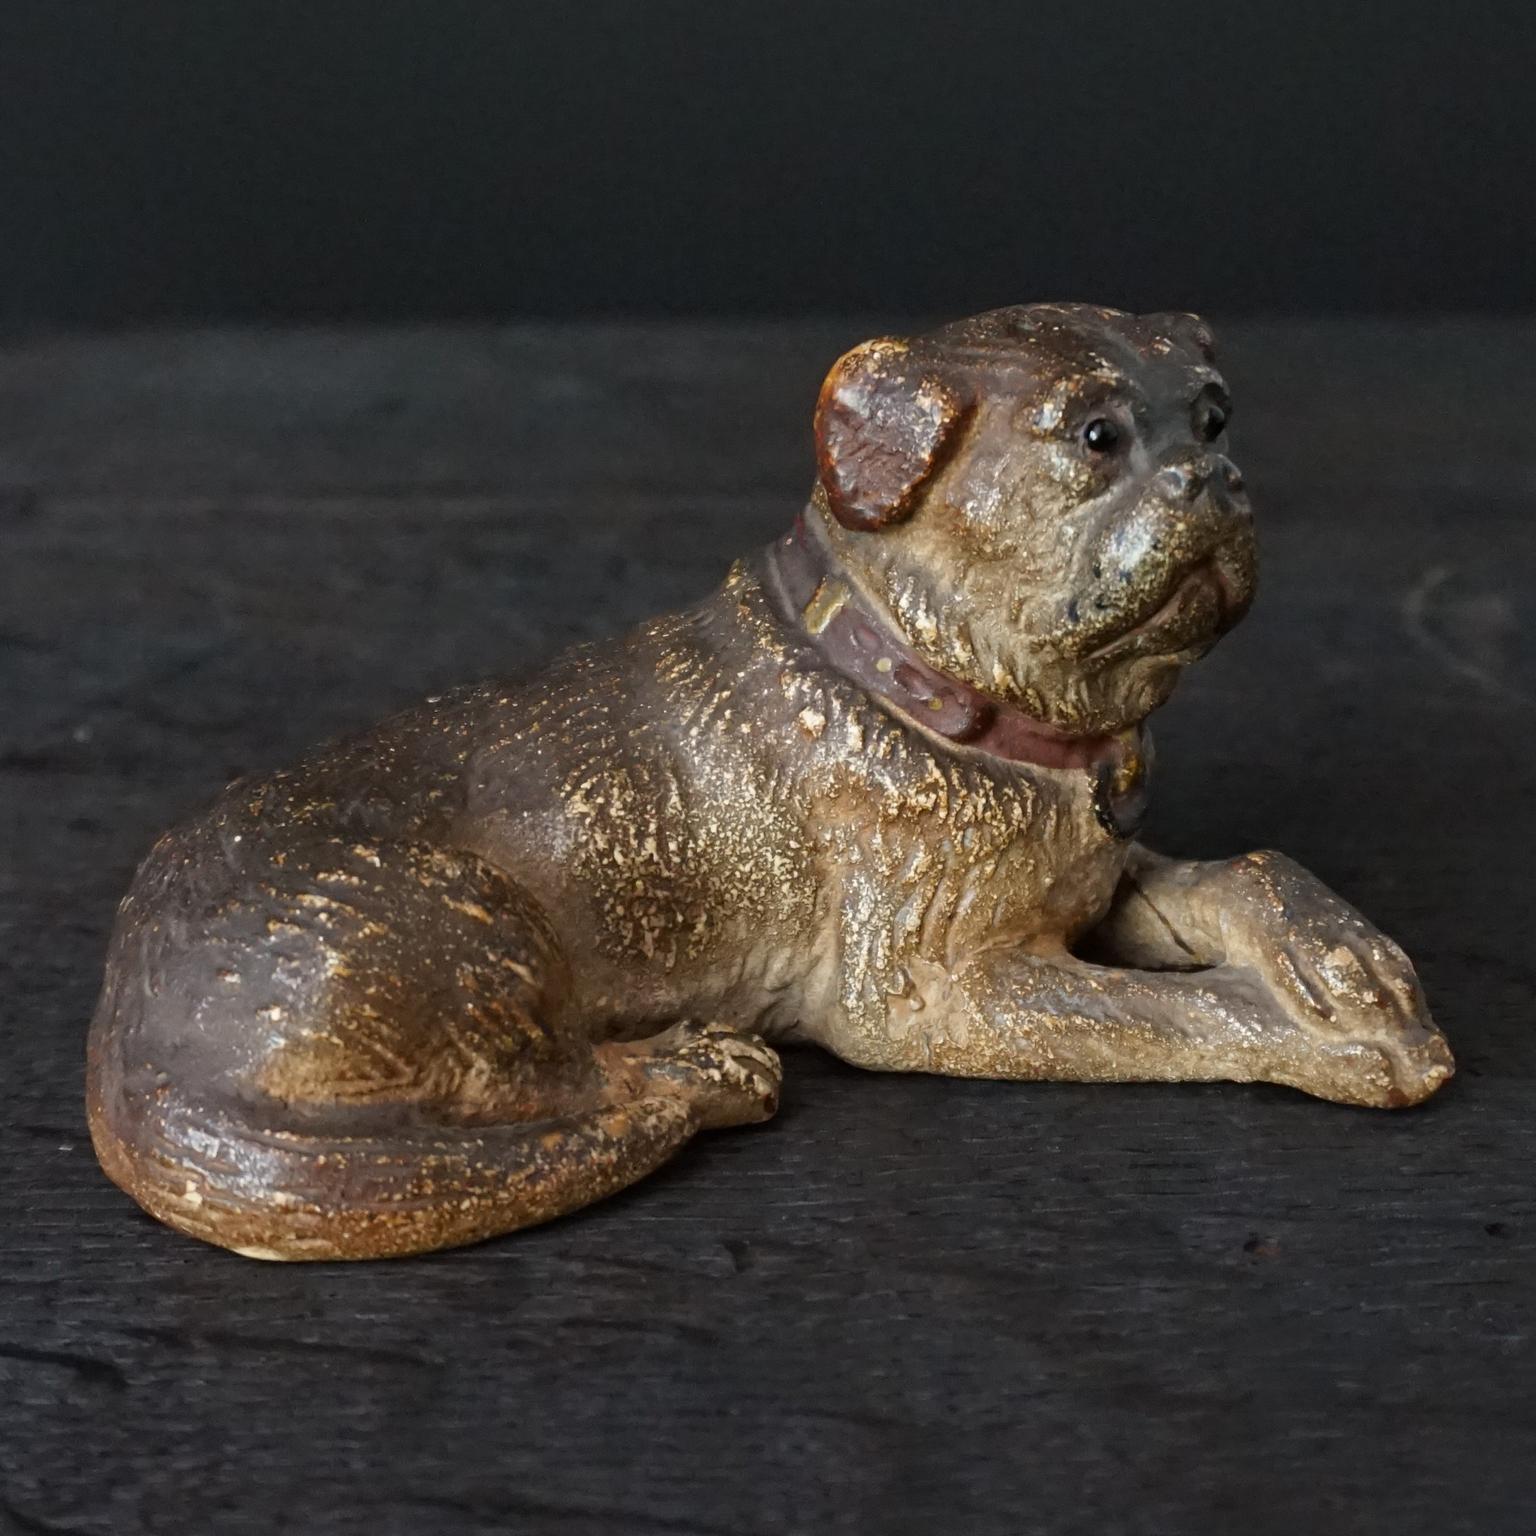 19th century Austrian terracotta lying mini pug dog with red collar and glass eyes.

I found this very lovely small Austrian cold hand painted terracotta model of a lying Pug dog with little painted red collar and black glass pin eyes. I could not